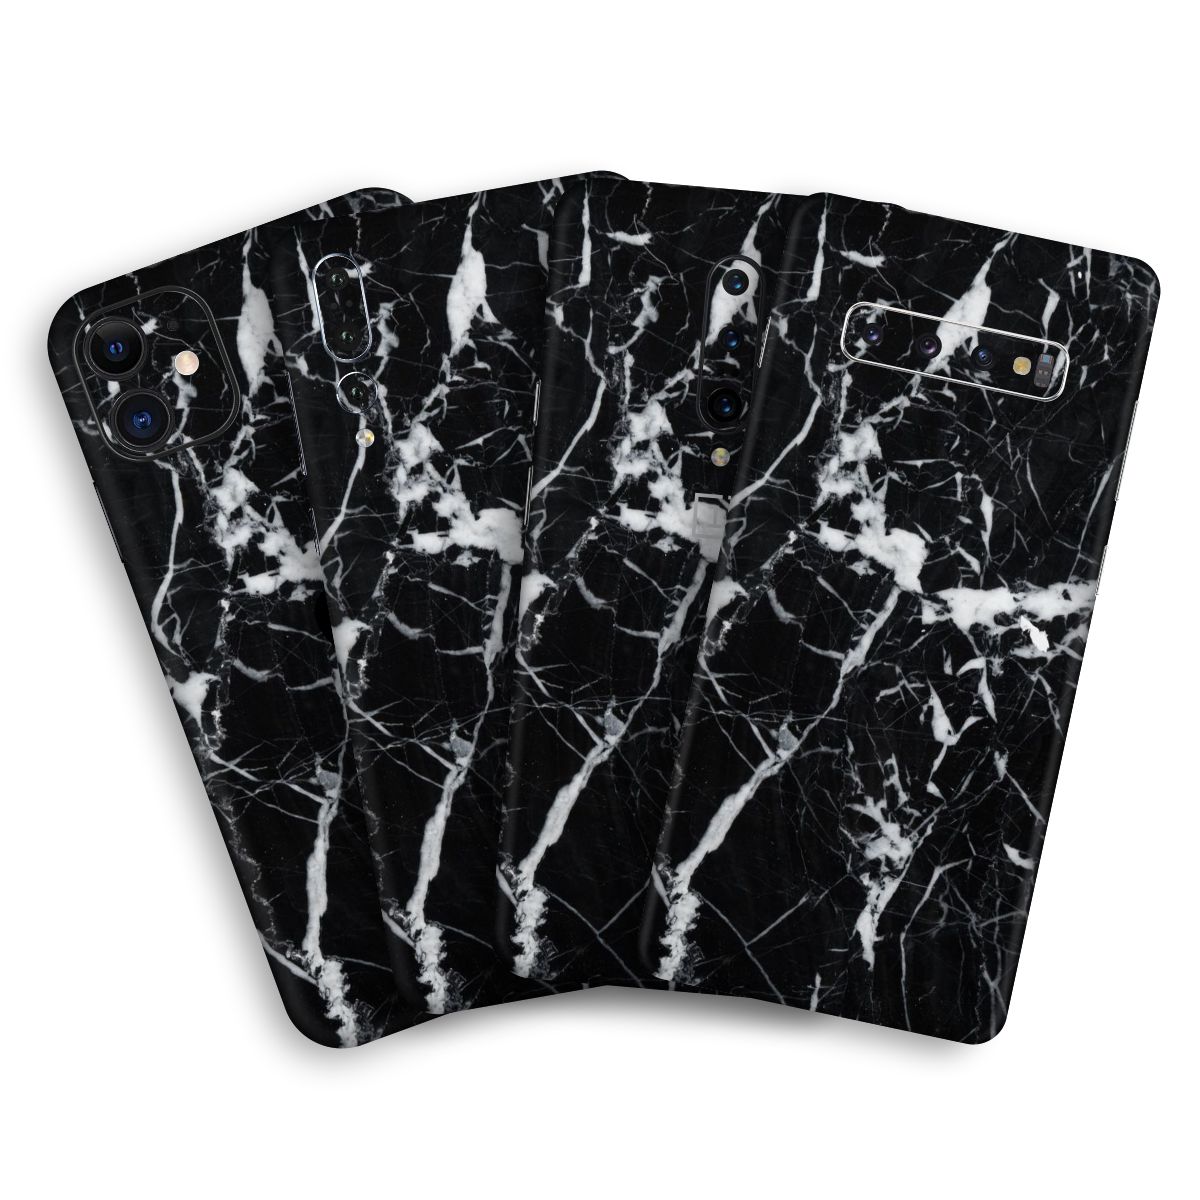 Black Marble Mobile Skin / Mobile Wrap for Samsung Galaxy S9 Plus